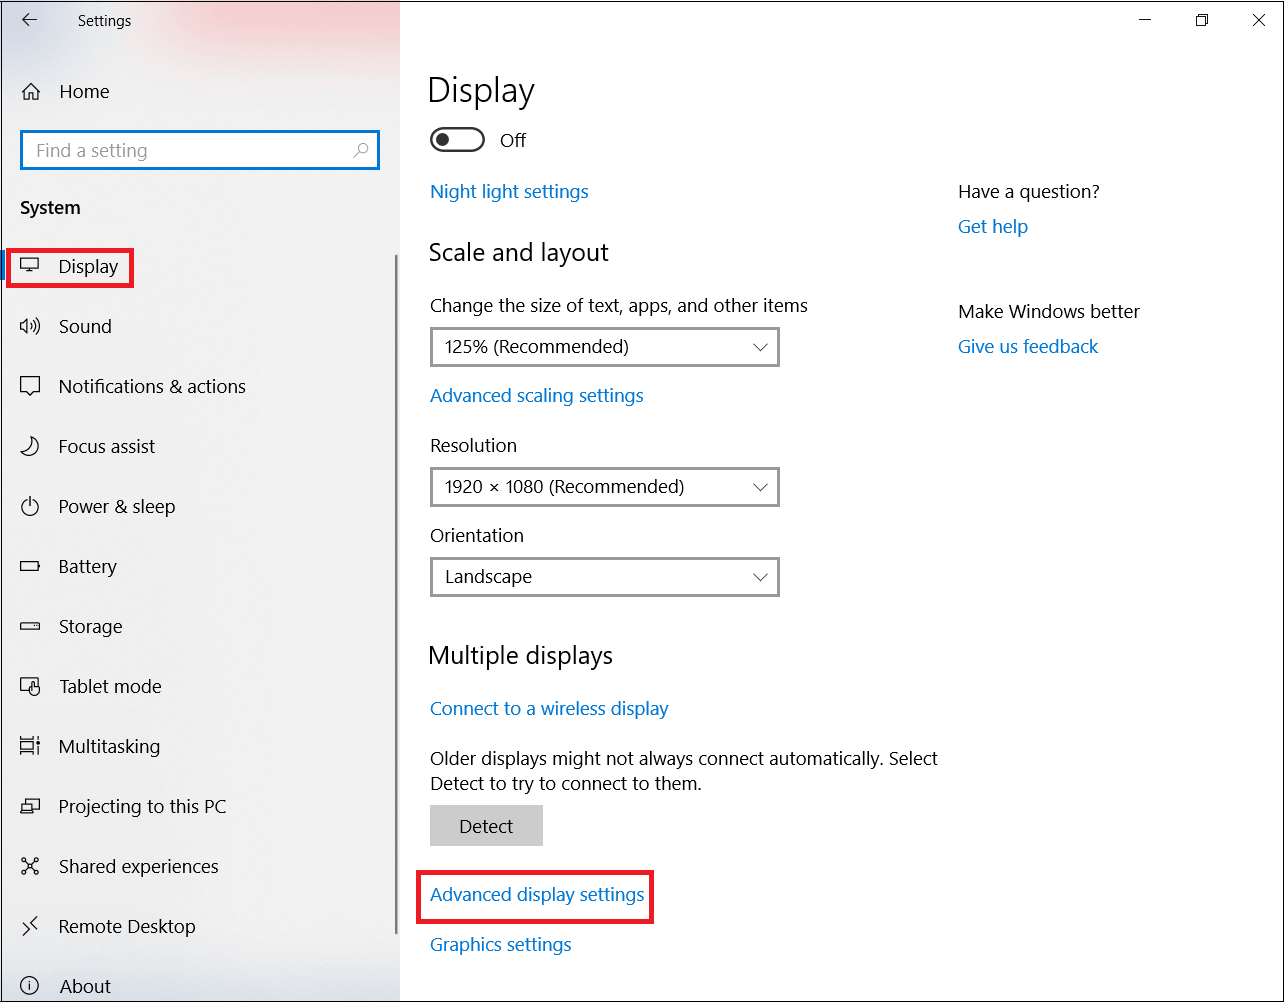 Scroll down and you will find advanced display settings.